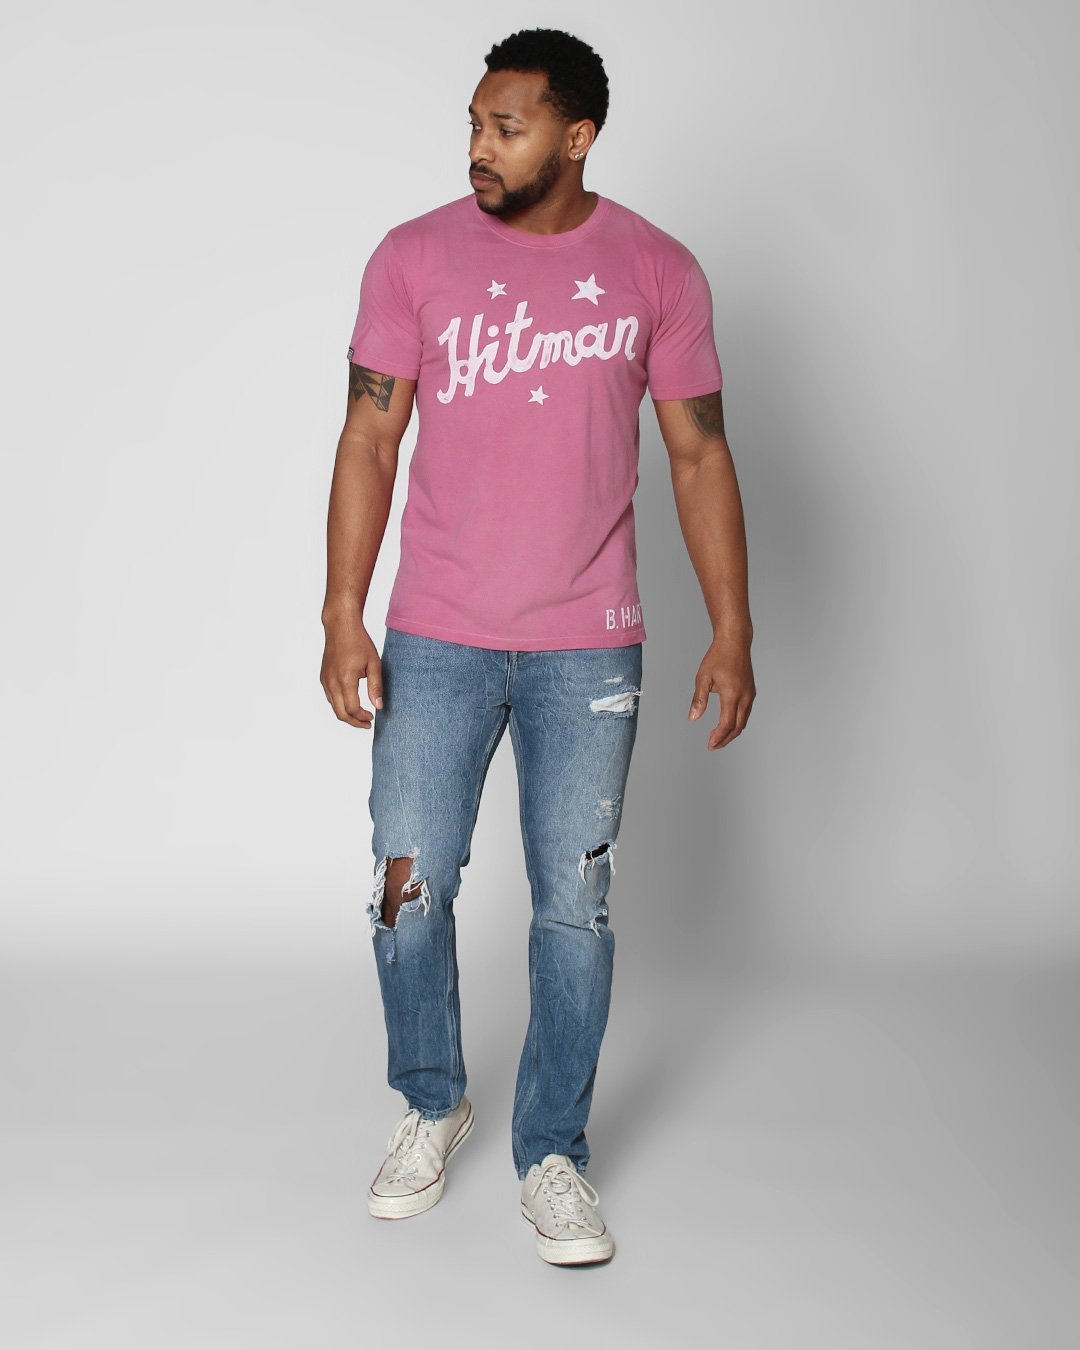 Bret Hart Hitman Tee - Roots of Fight Canada